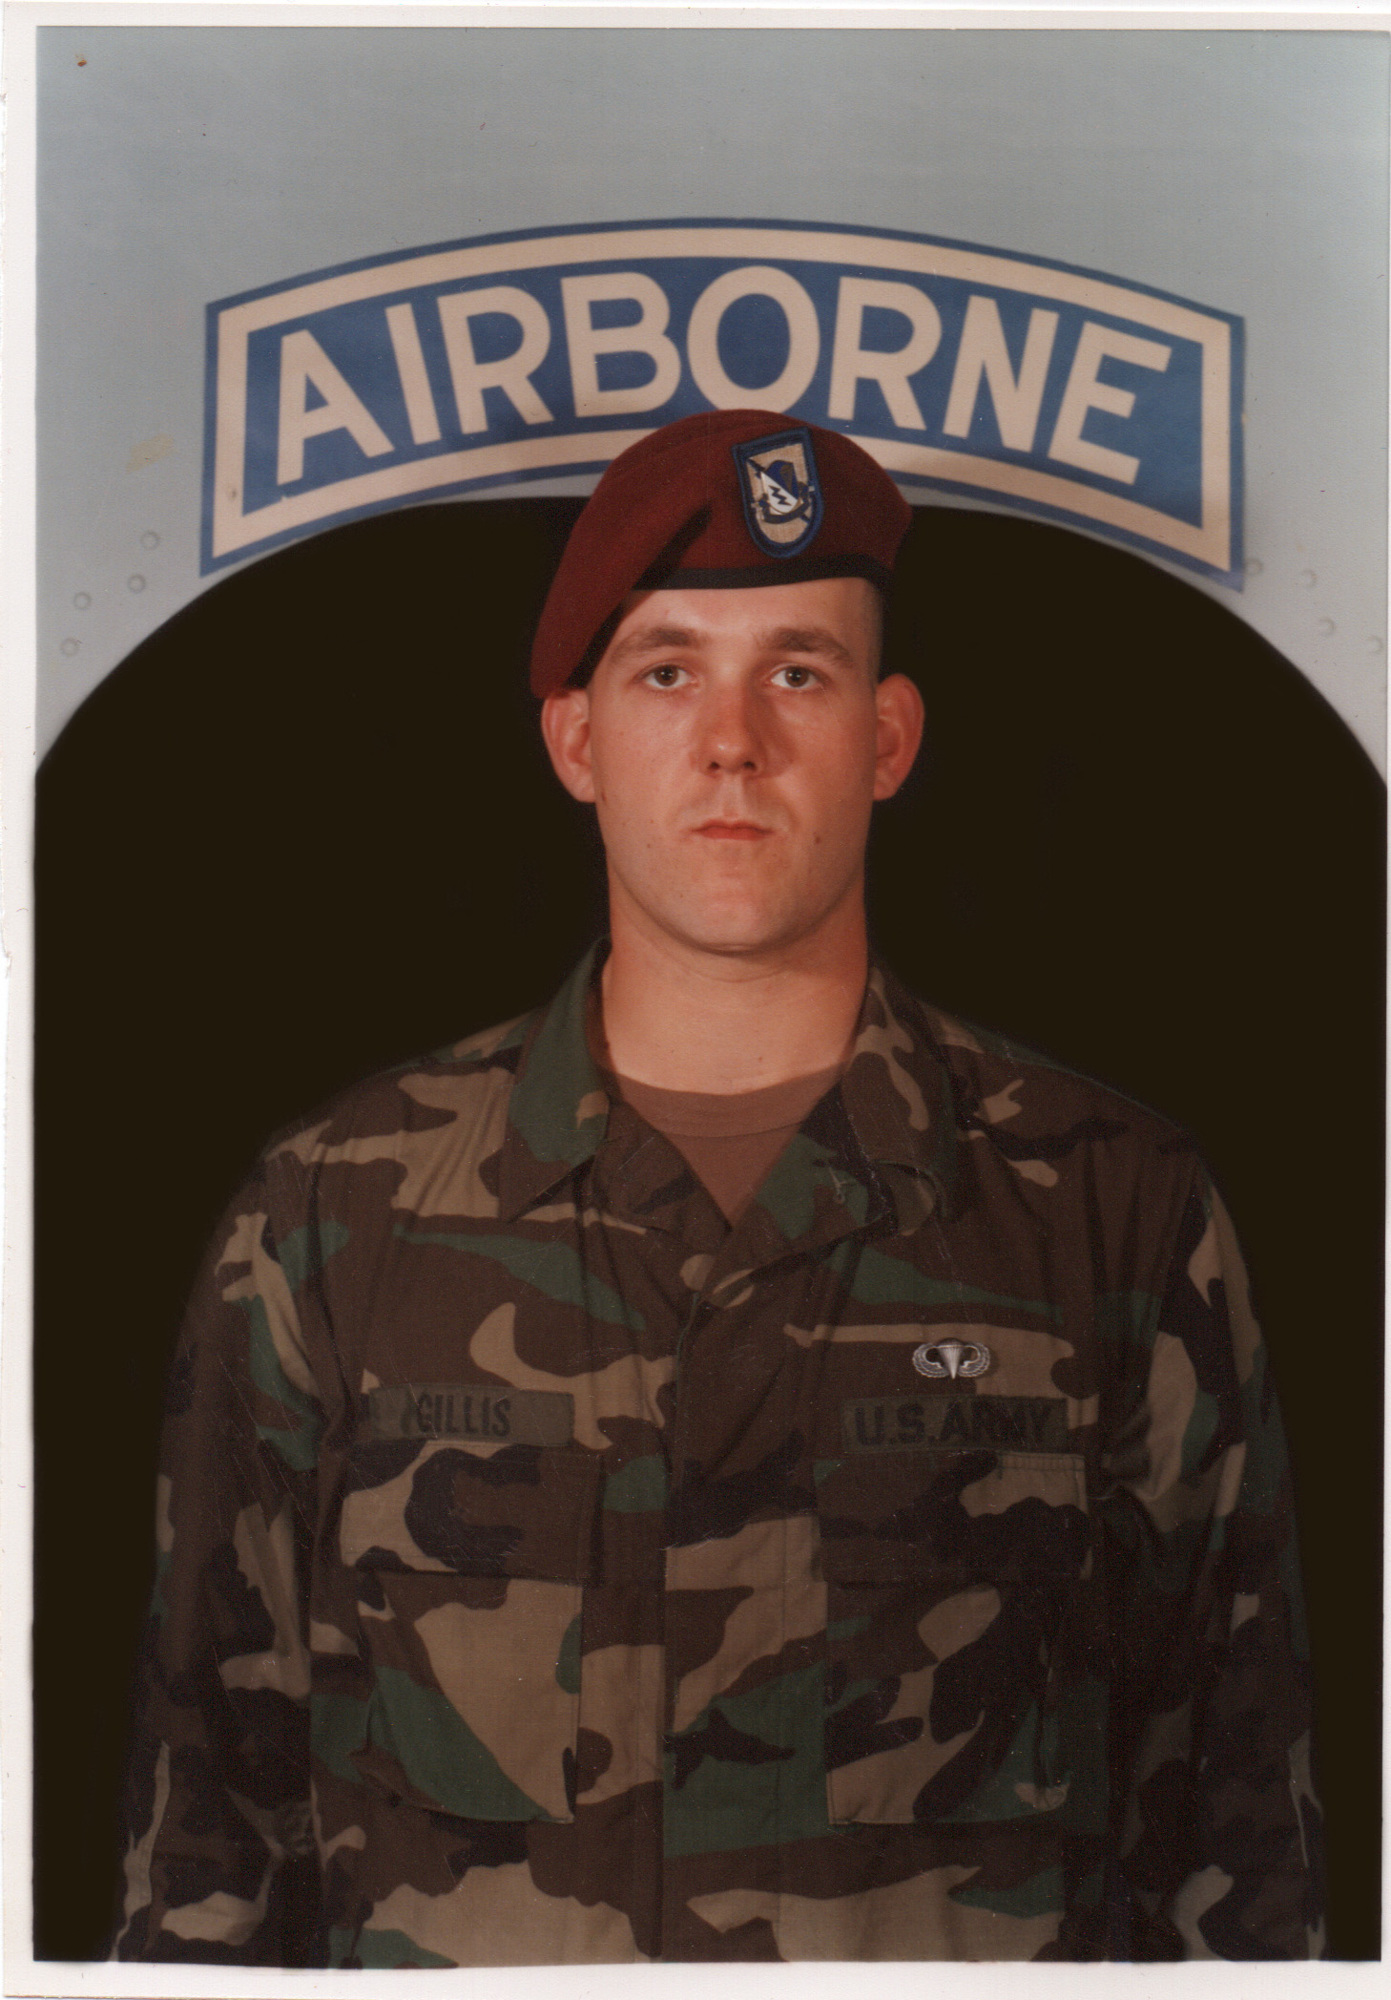 James Gillis trained to be an 82nd Airborne Ranger, but an automobile crash cut short his dreams.